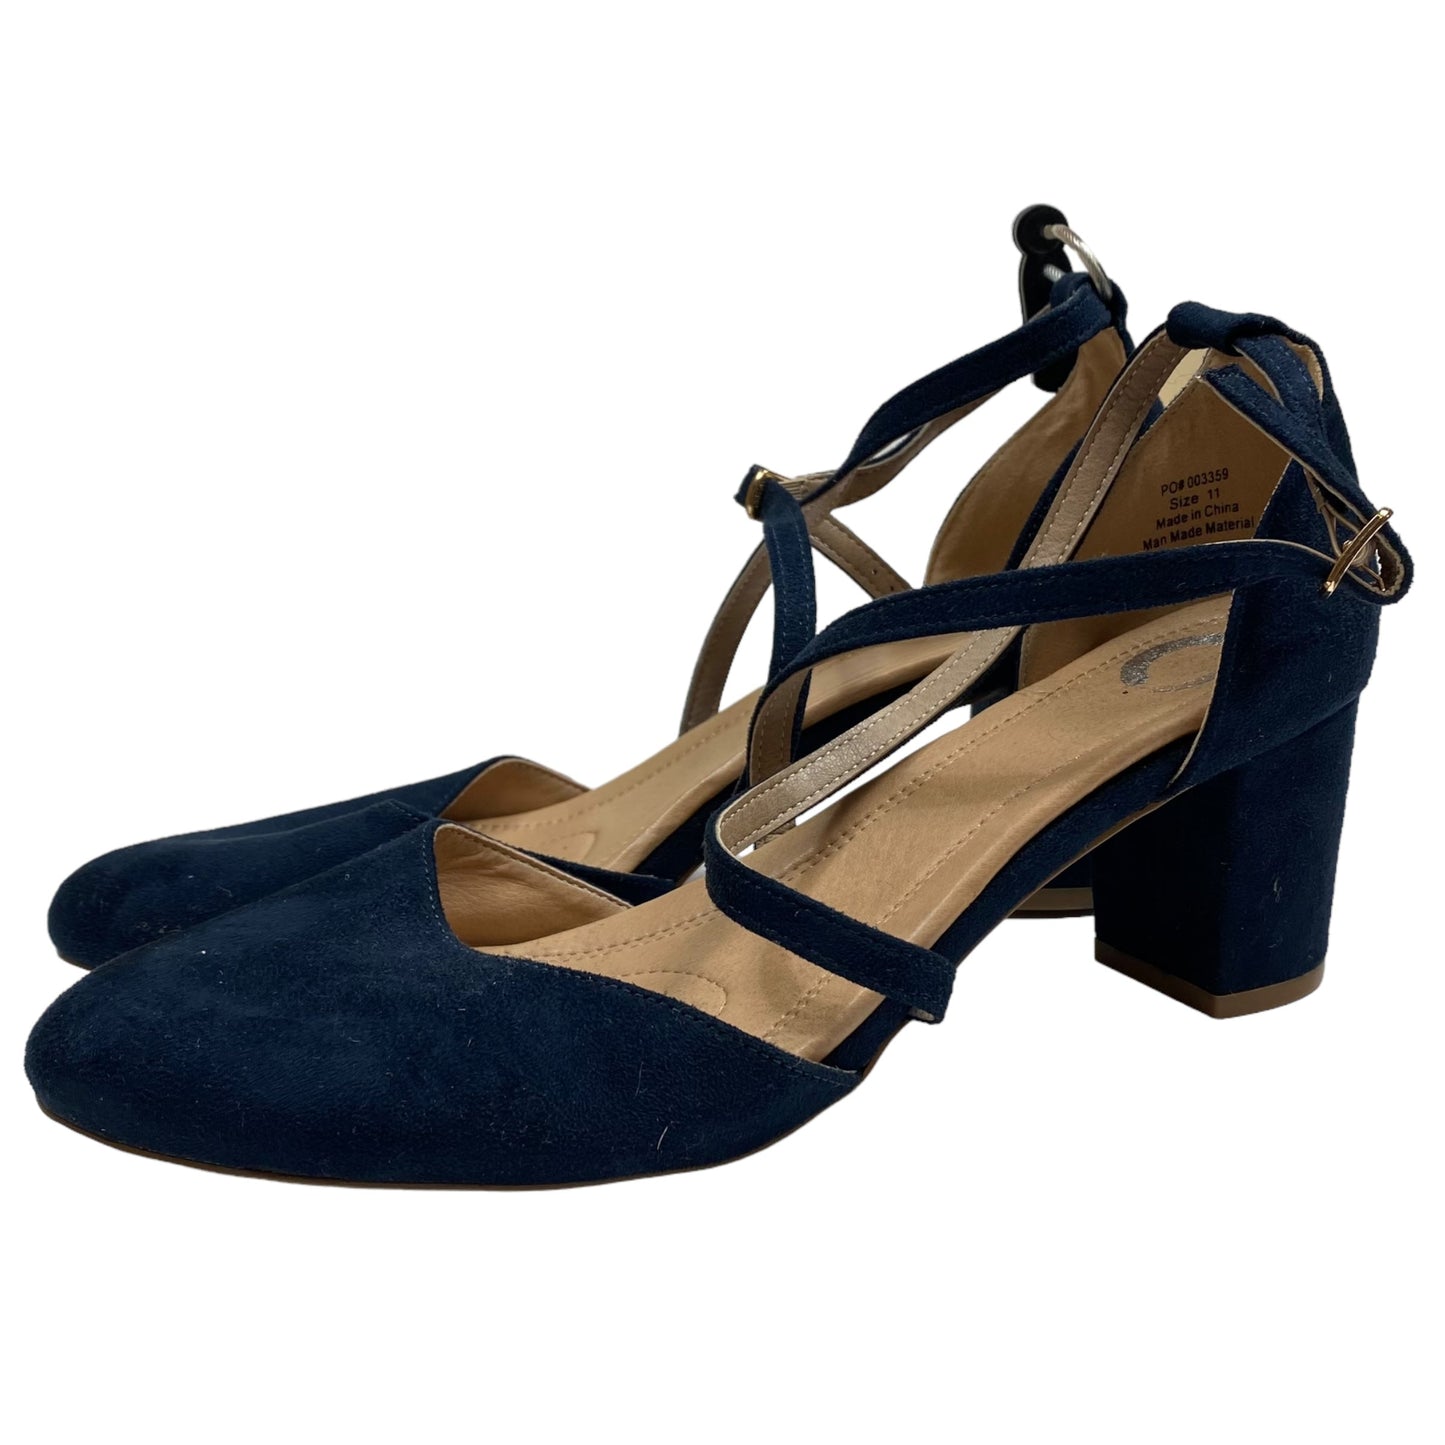 Navy Shoes Heels Block Clothes Mentor, Size 11